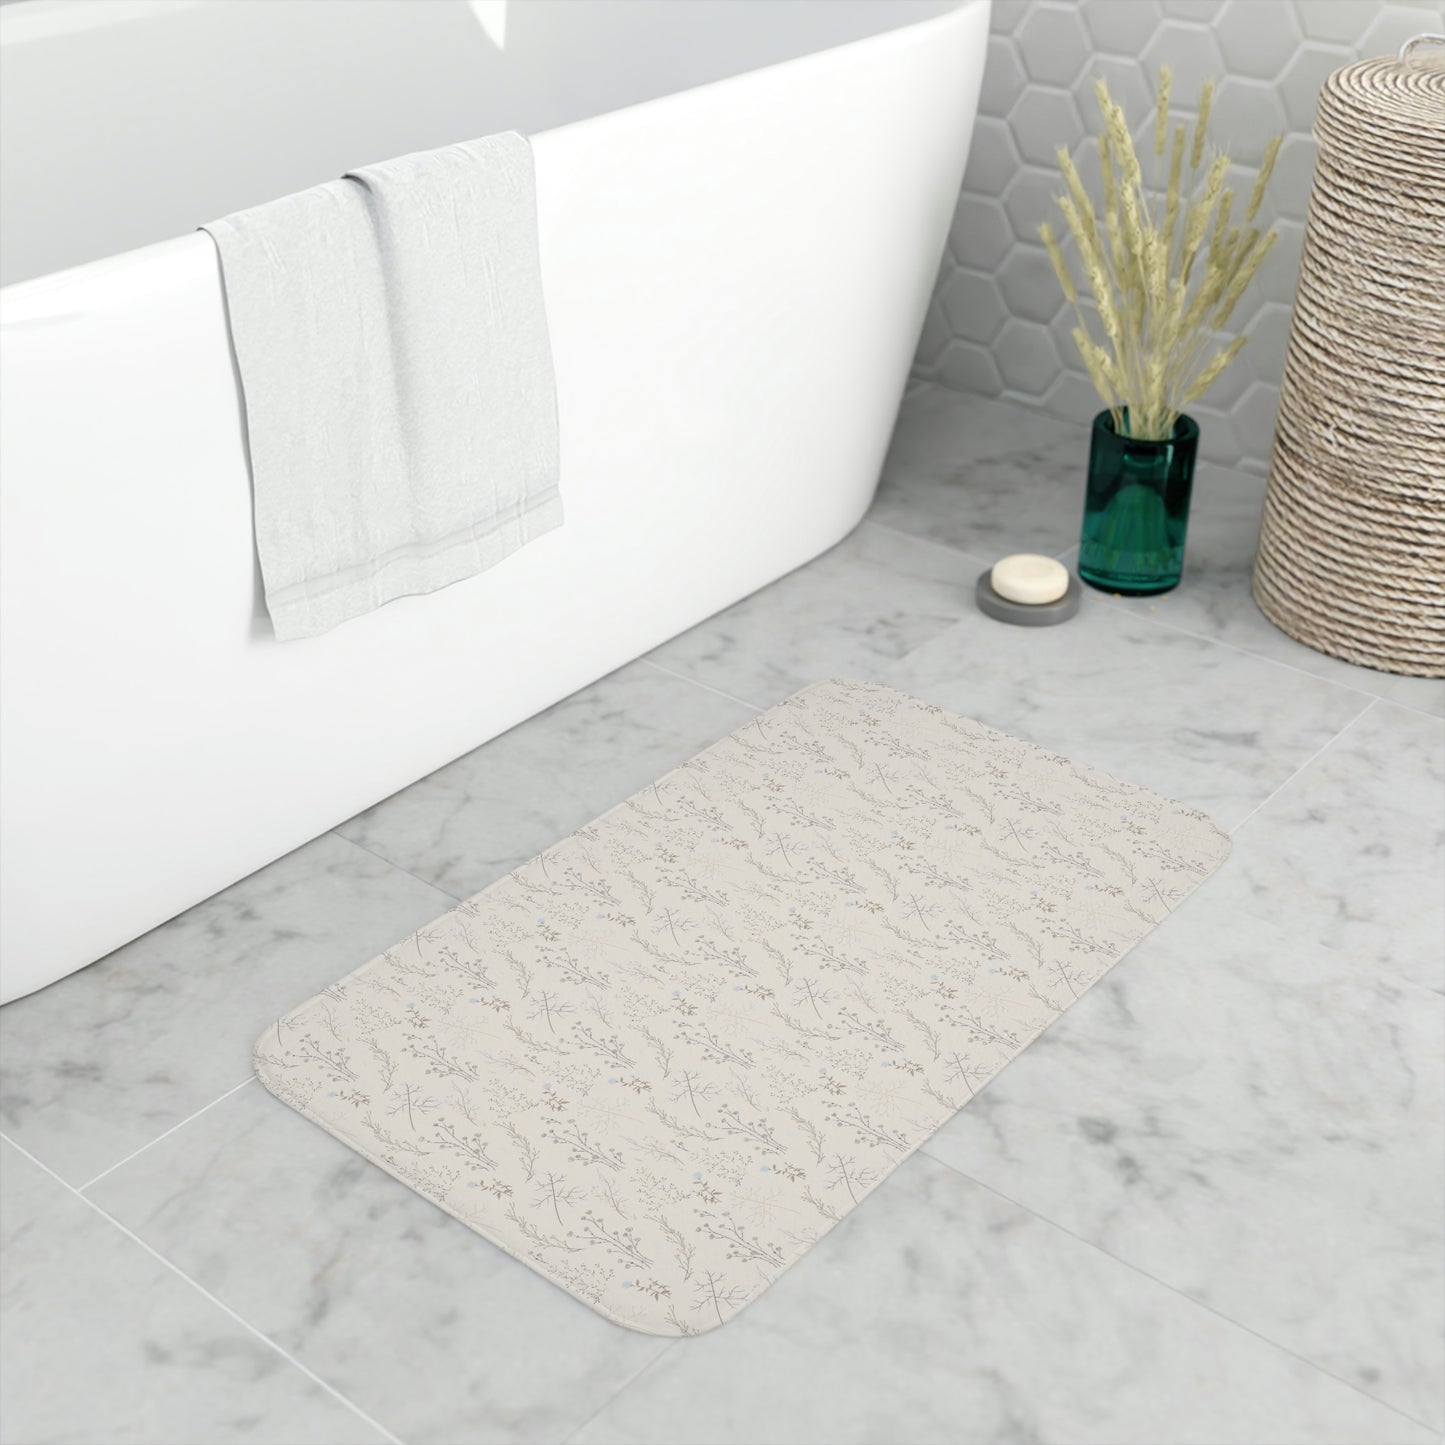 Taupe Floral Print Memory Foam Bathmat | 2 Sizes Available